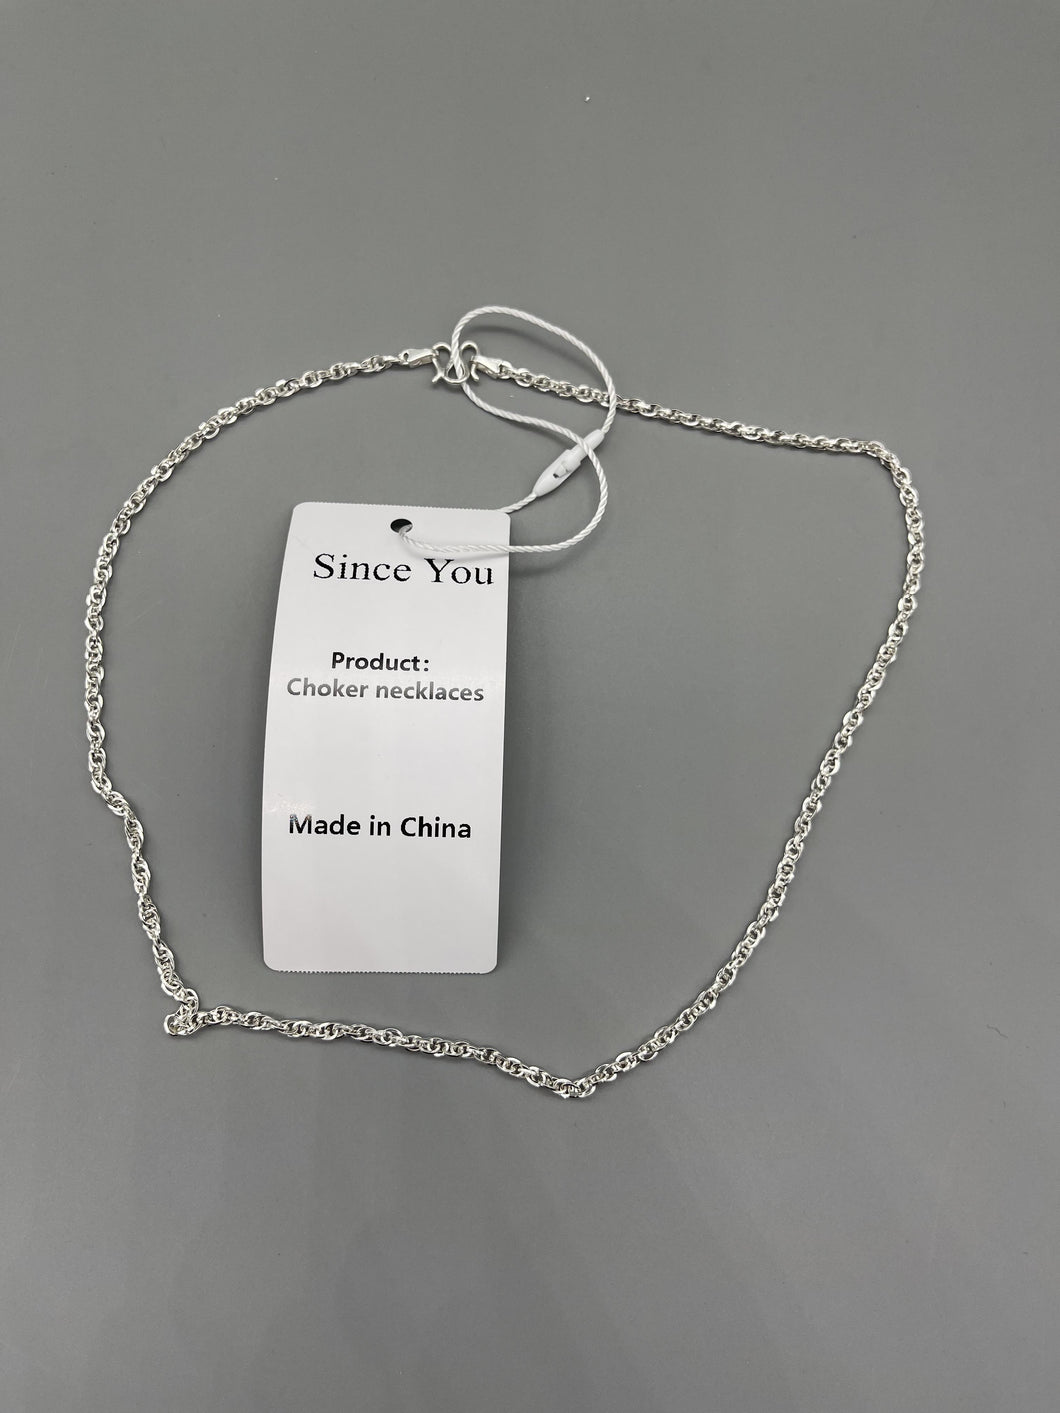 Since you Choker necklaces,925 Sterling Silver Thin Cable Link Chain Necklace ,Curb Link Chain Necklace, Men & Women, Super Thin & Strong - Friendly Price & Quality 20Inch